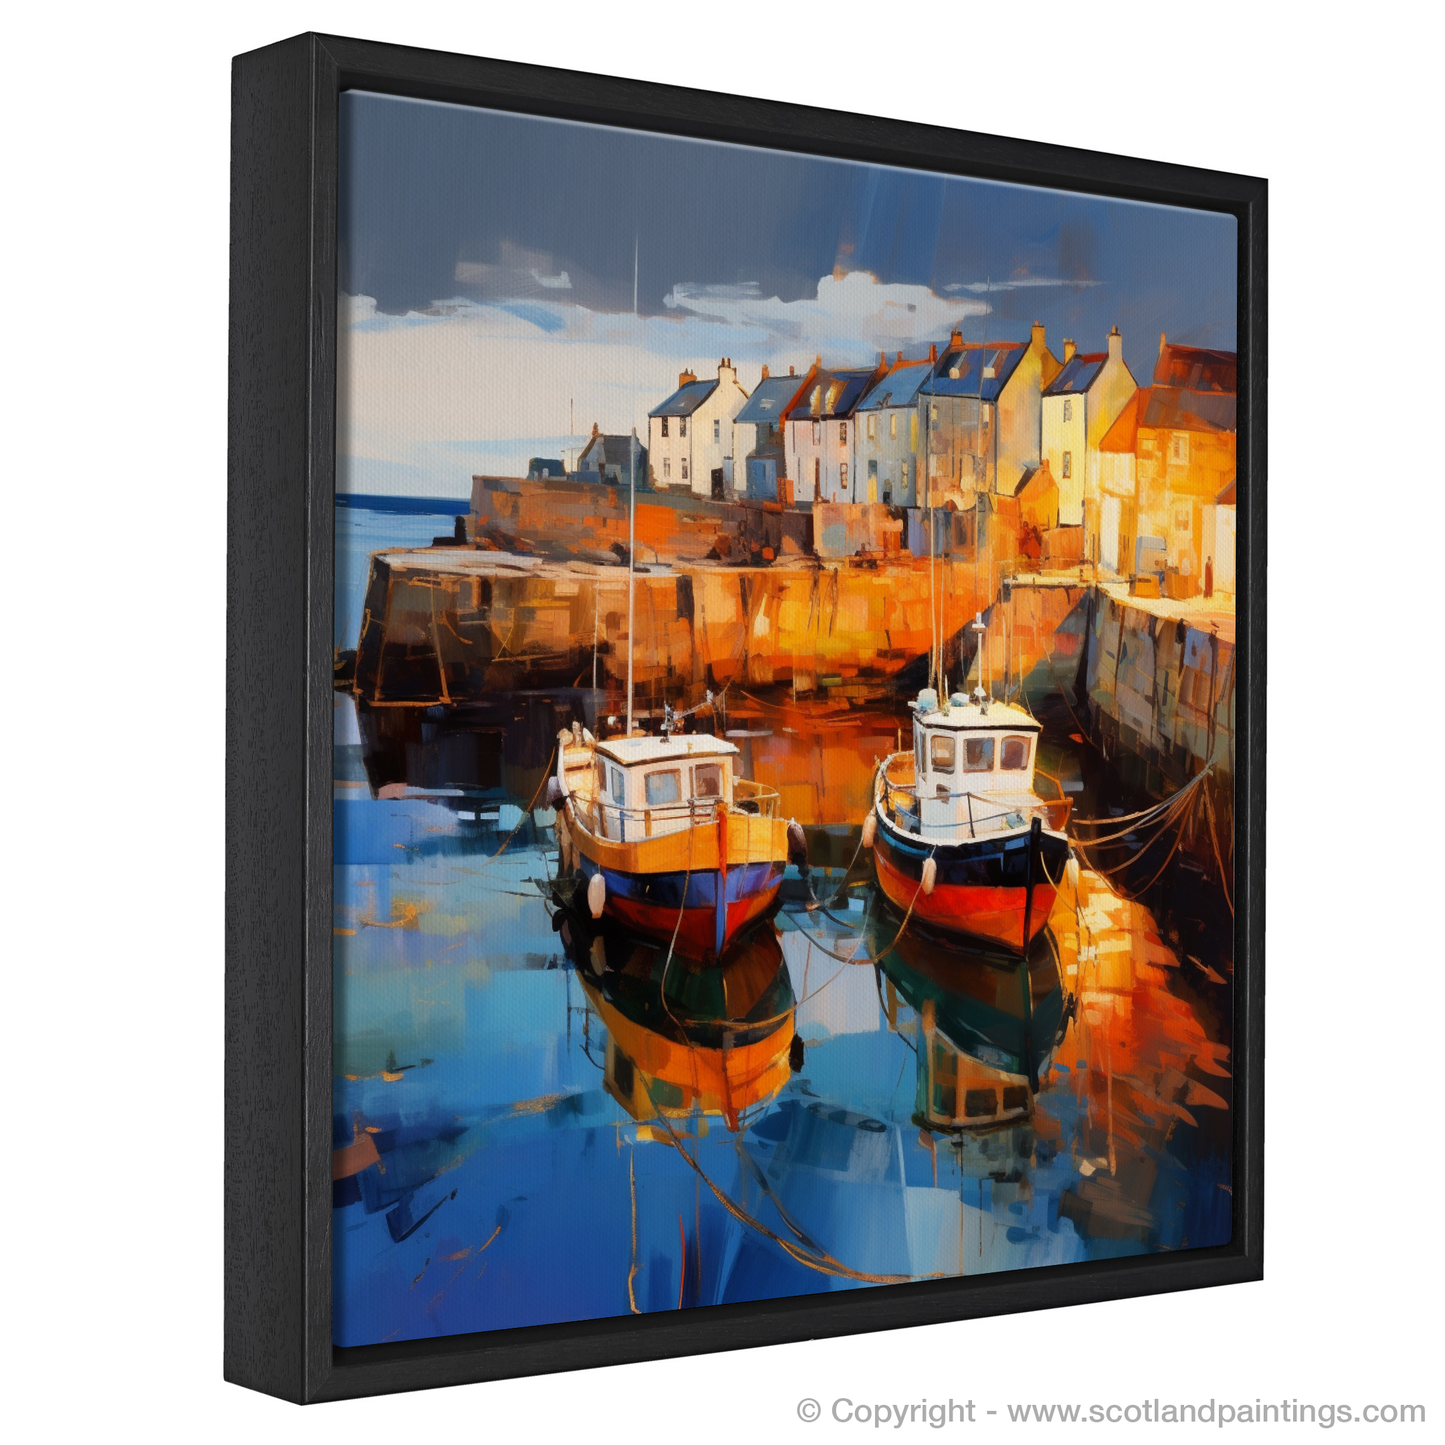 Painting and Art Print of Pittenweem Harbour at dusk entitled "Dusk Symphony at Pittenweem Harbour".